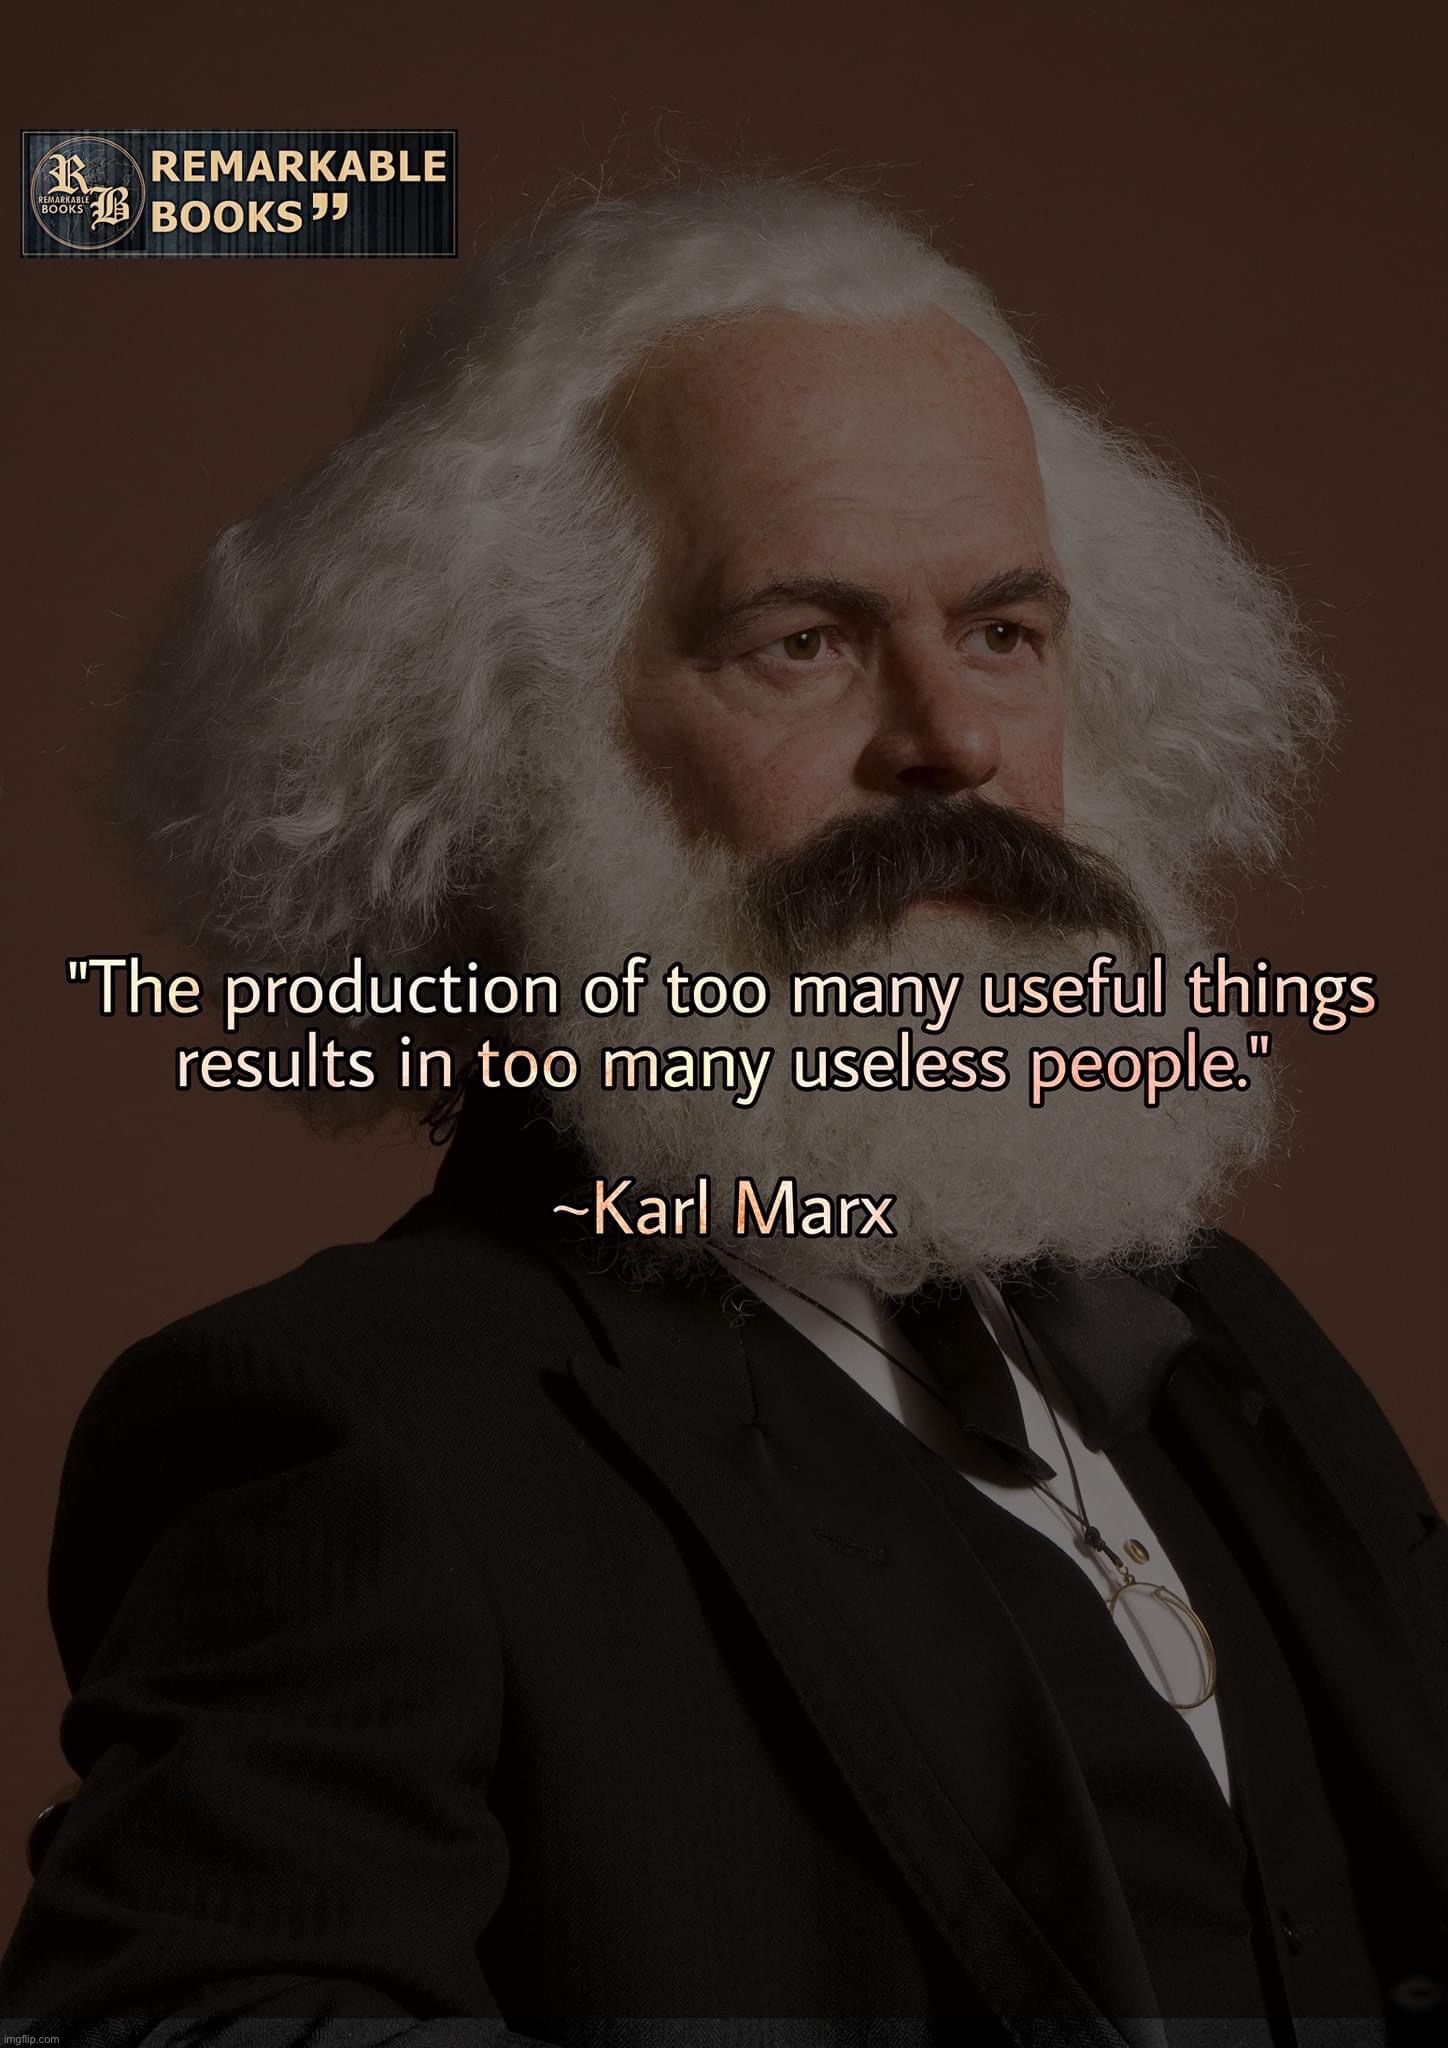 Karl Marx quote | image tagged in karl marx quote | made w/ Imgflip meme maker